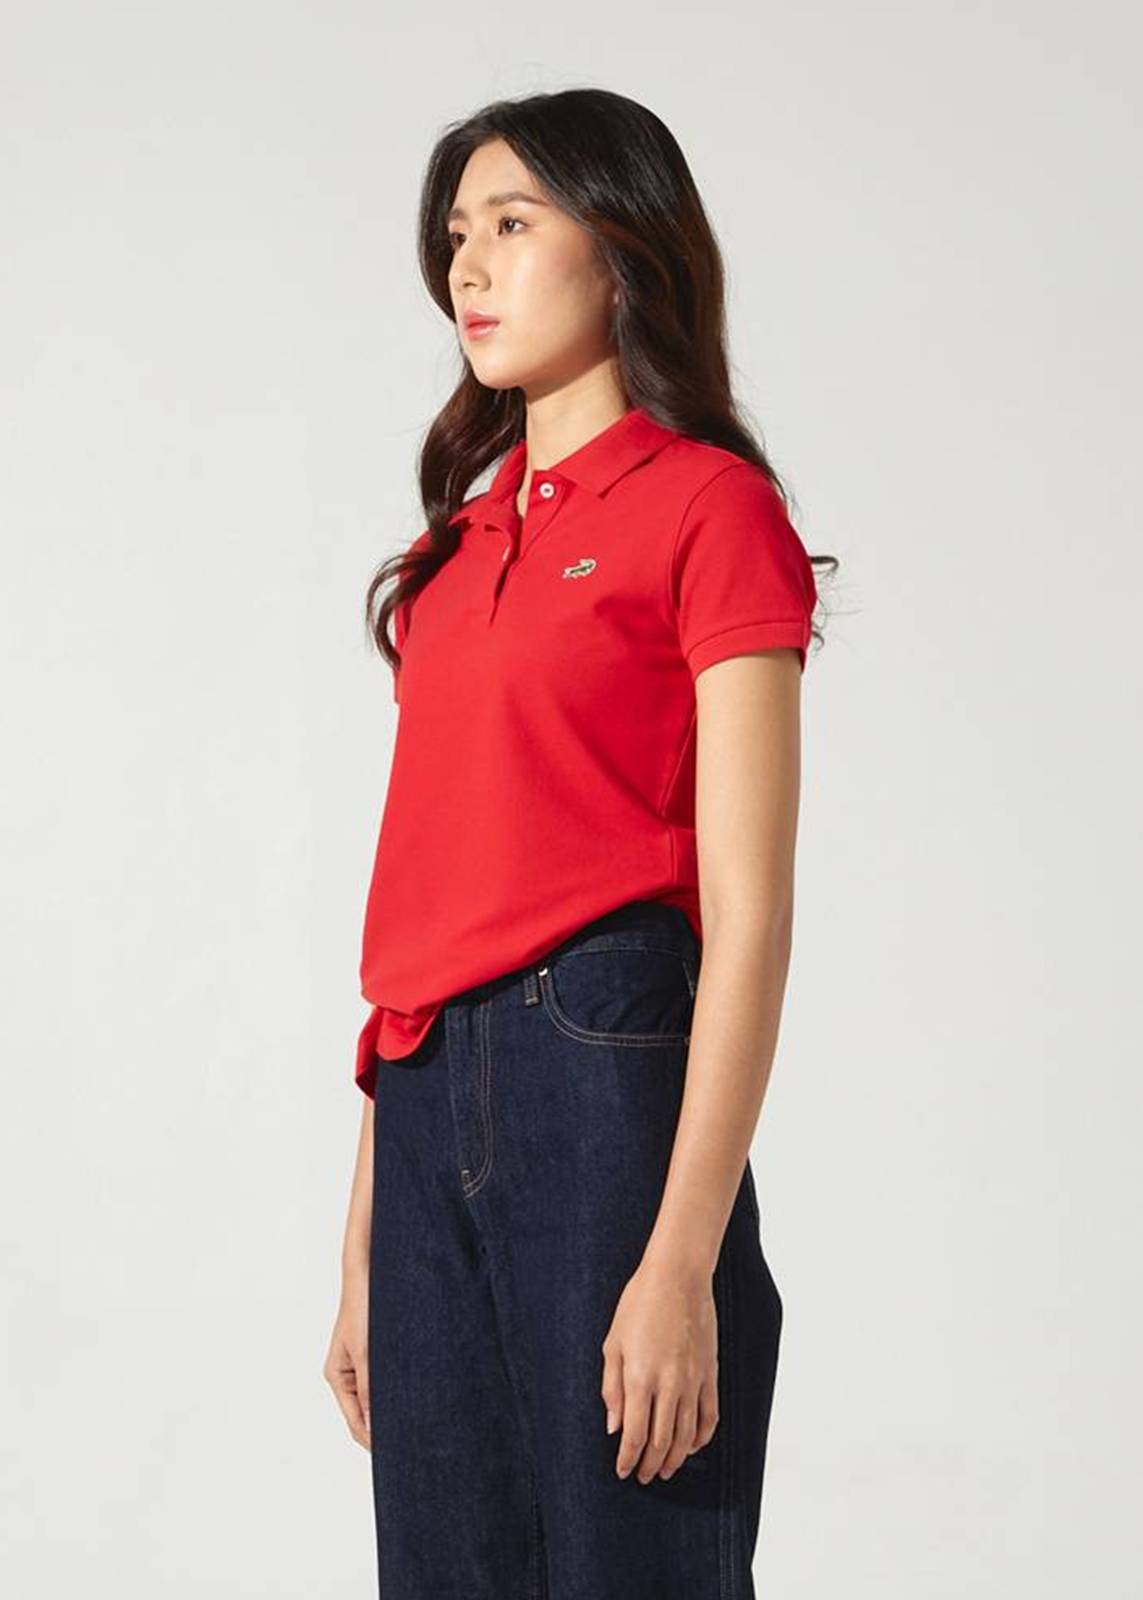 MOLTEN LAVA RED SLIM FIT LADY POLO SHIRT